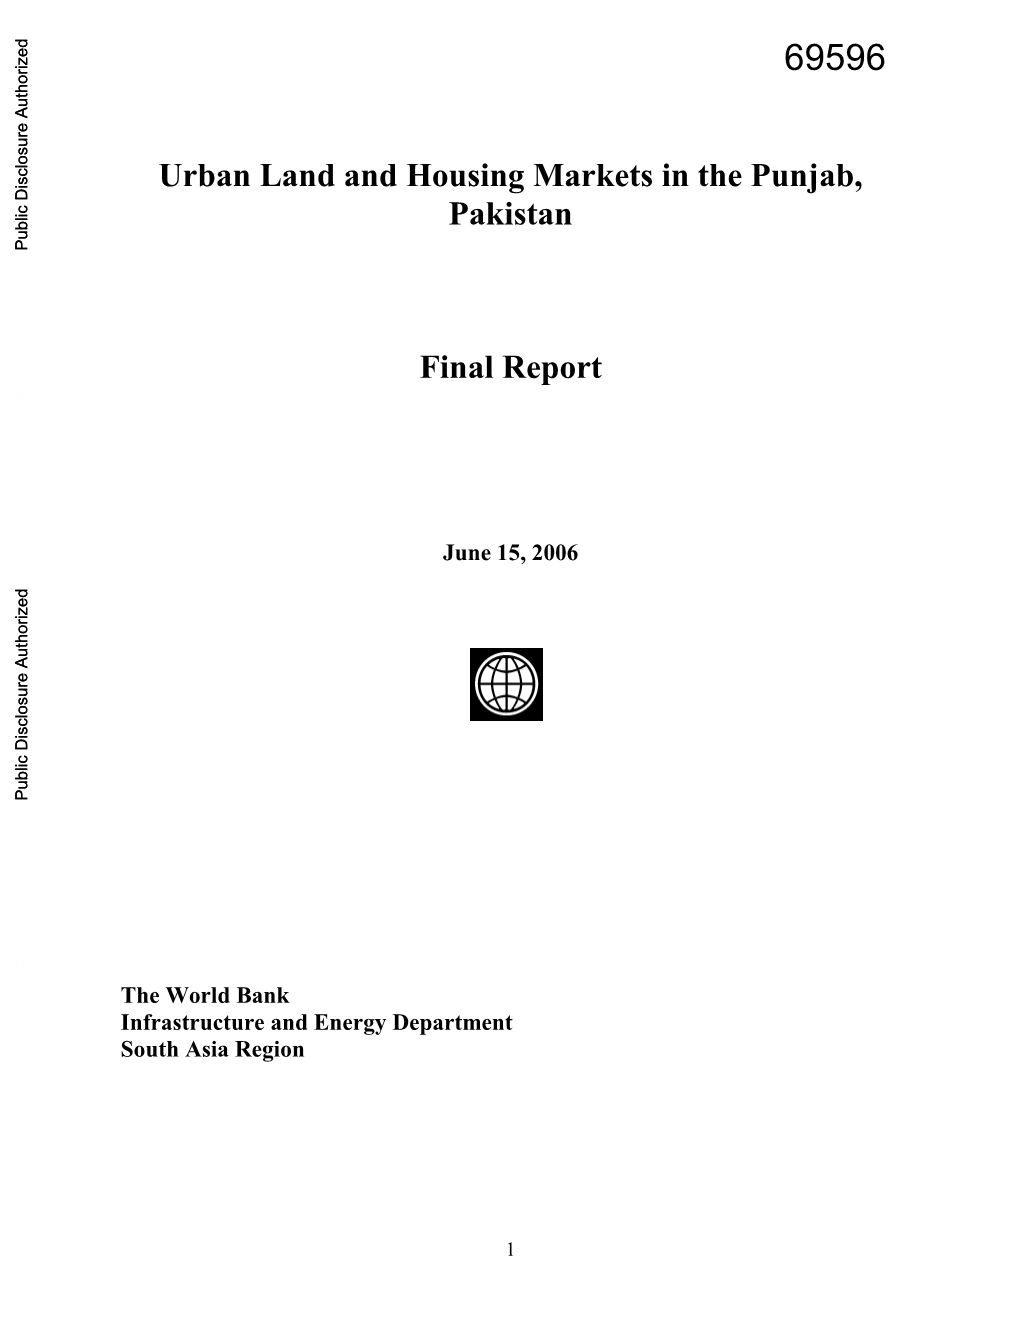 Urban Land and Housing Markets in the Punjab, Pakistan Final Report